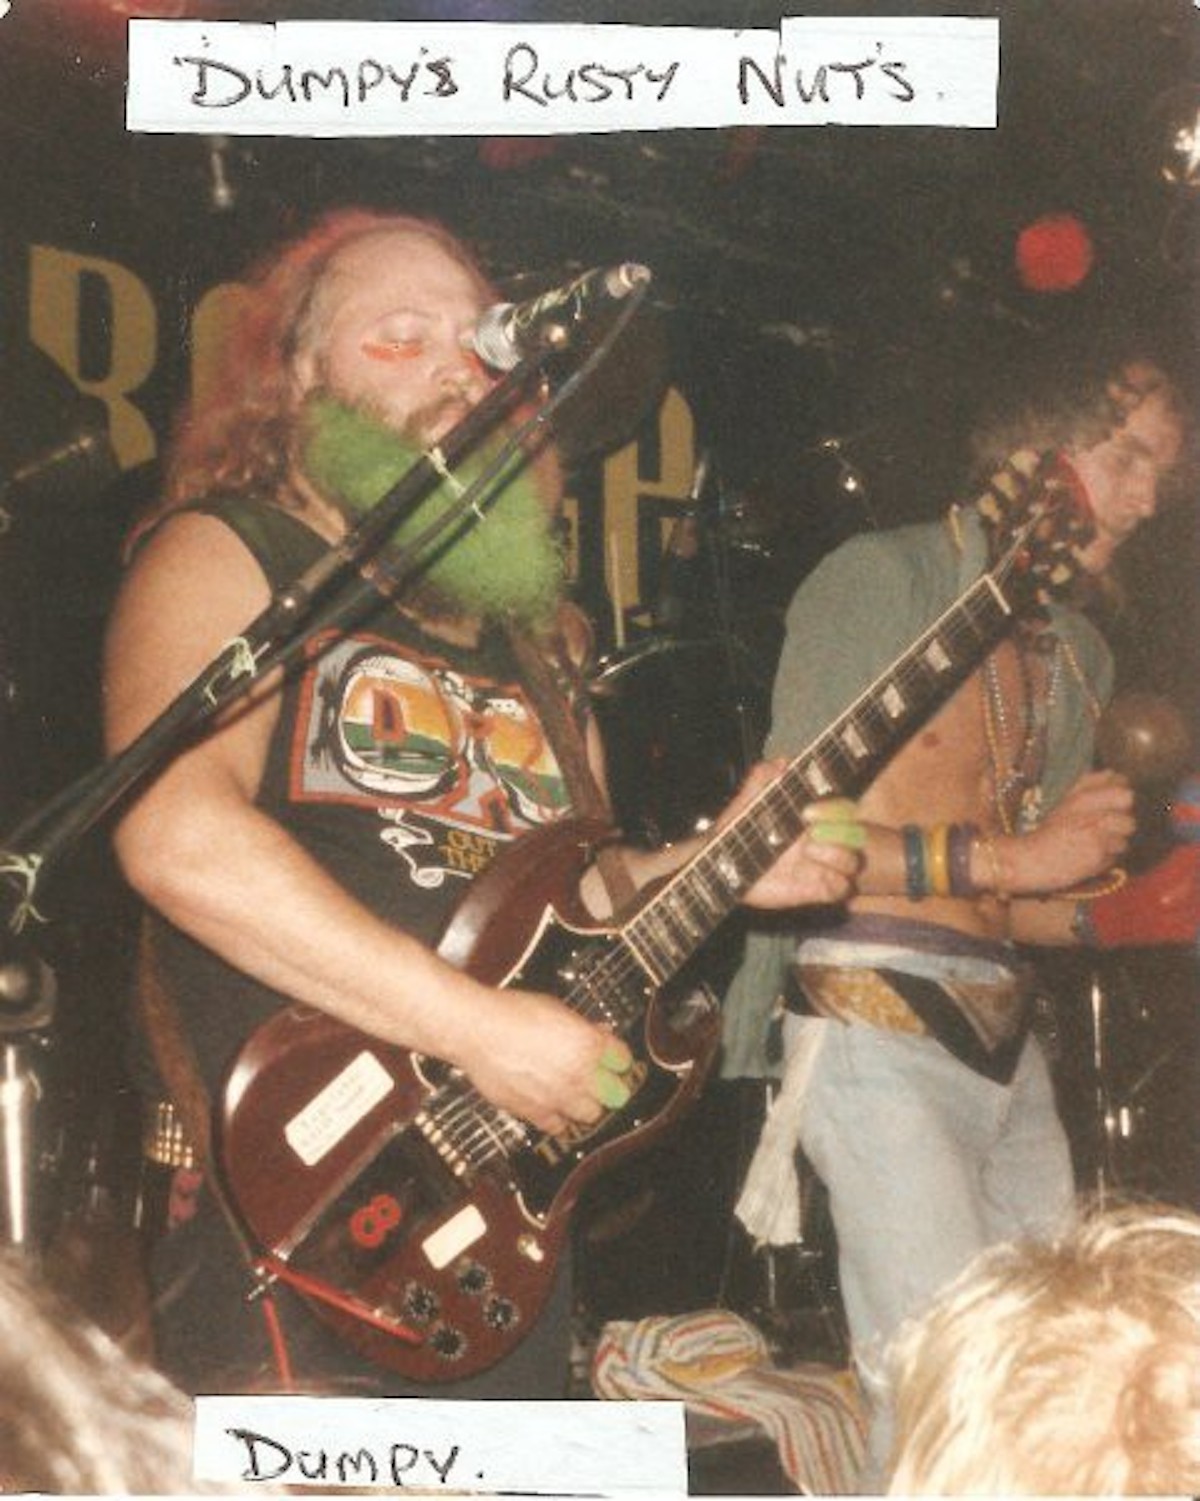 Jellett onstage at The Marquee, with Dumpy’s Rusty Nuts, 1986 (Source- Elisabeth Anne)